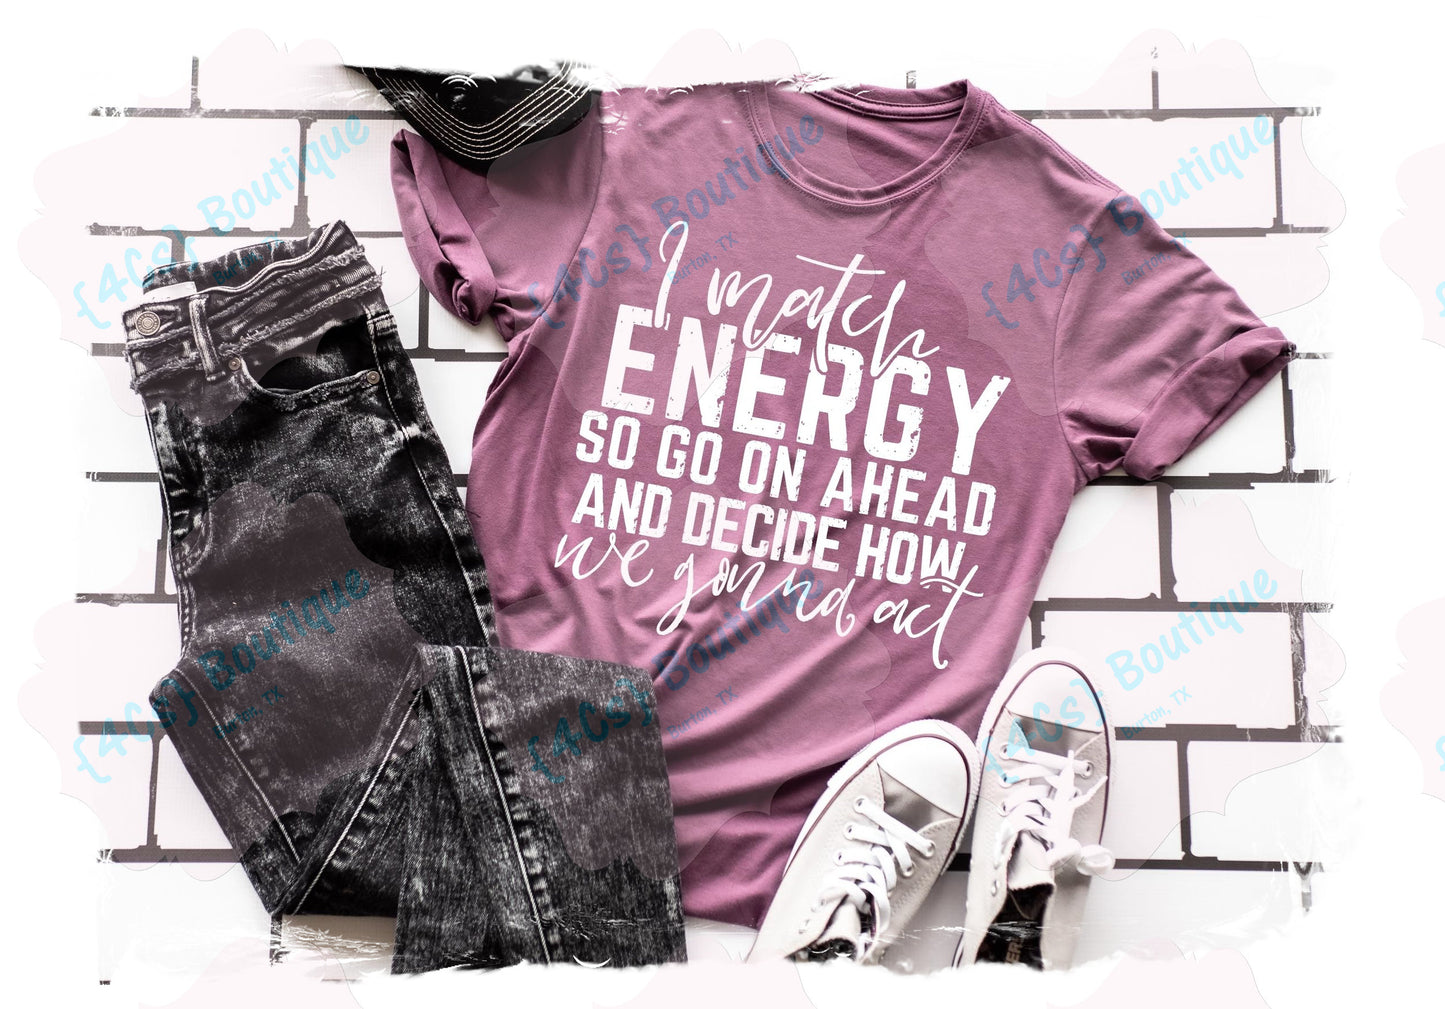 I Match Energy So Go Ahead And Decide How We Gonna Act Shirt